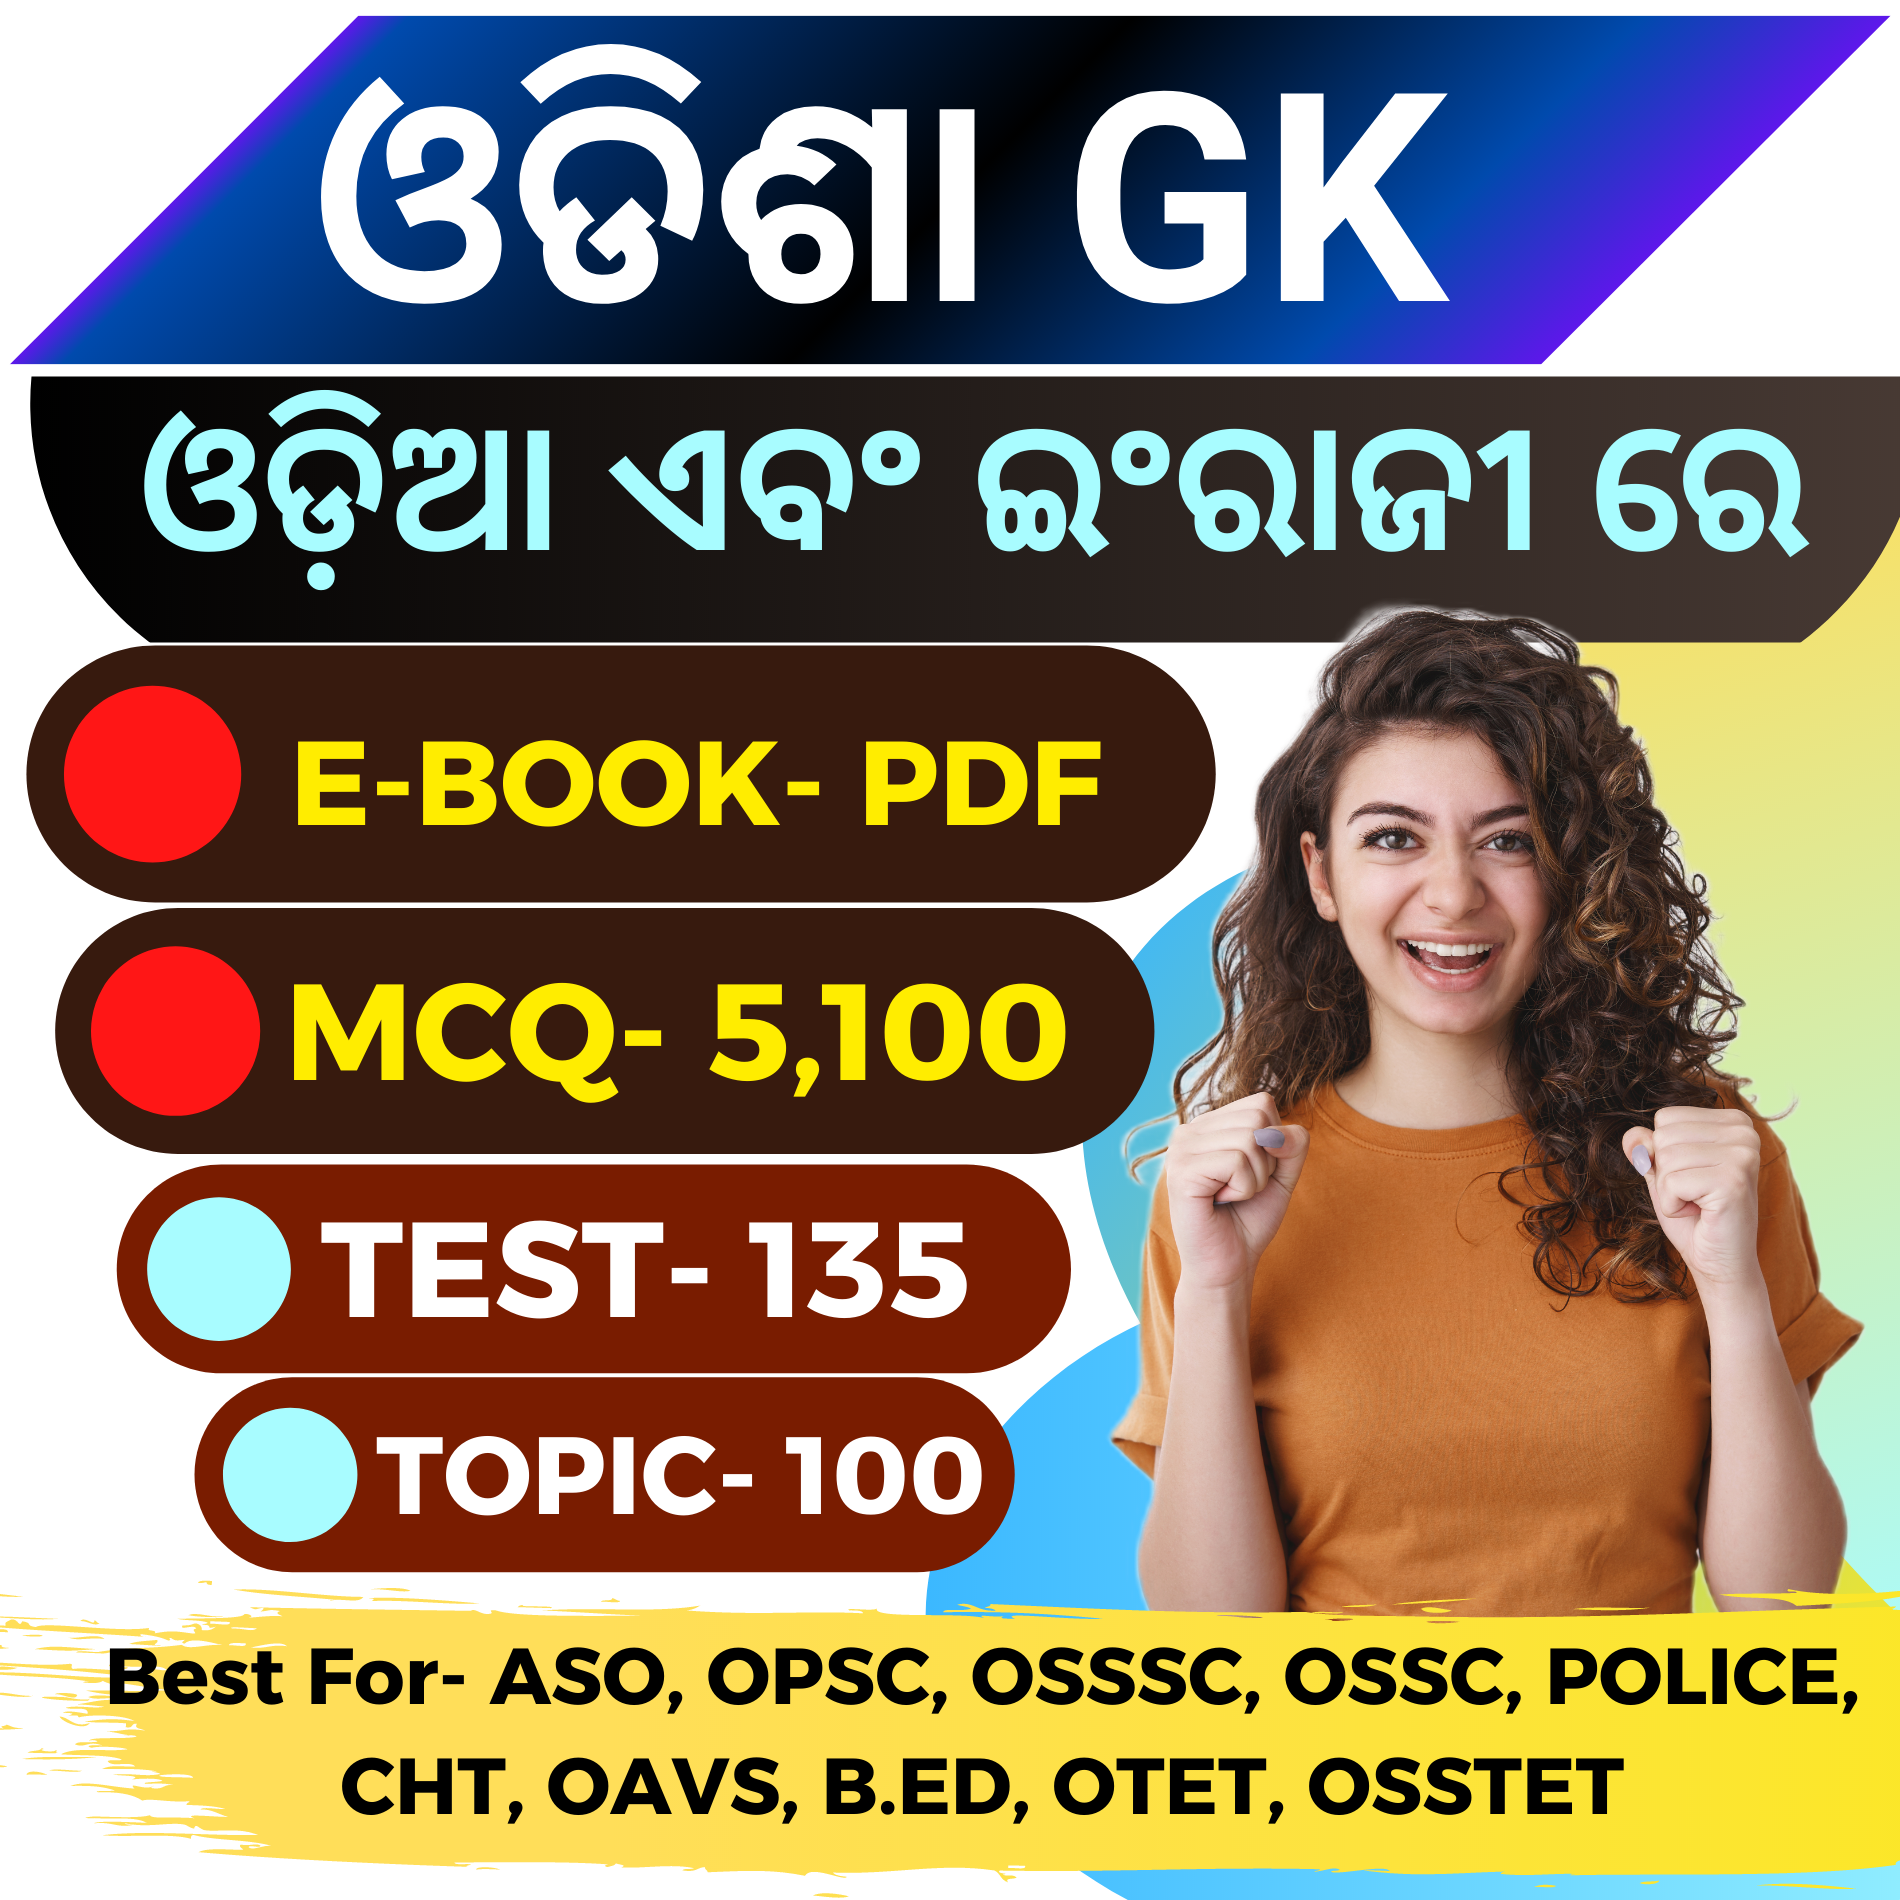 H- ODISHA GK (5,100 MCQ In Odia &amp; English Language ) + 135 MOCK TEST (All Topic Wise For ASO, OPSC, OSSSC, OSSC, POLICE &amp; ALL TEACHERS EXAMS)